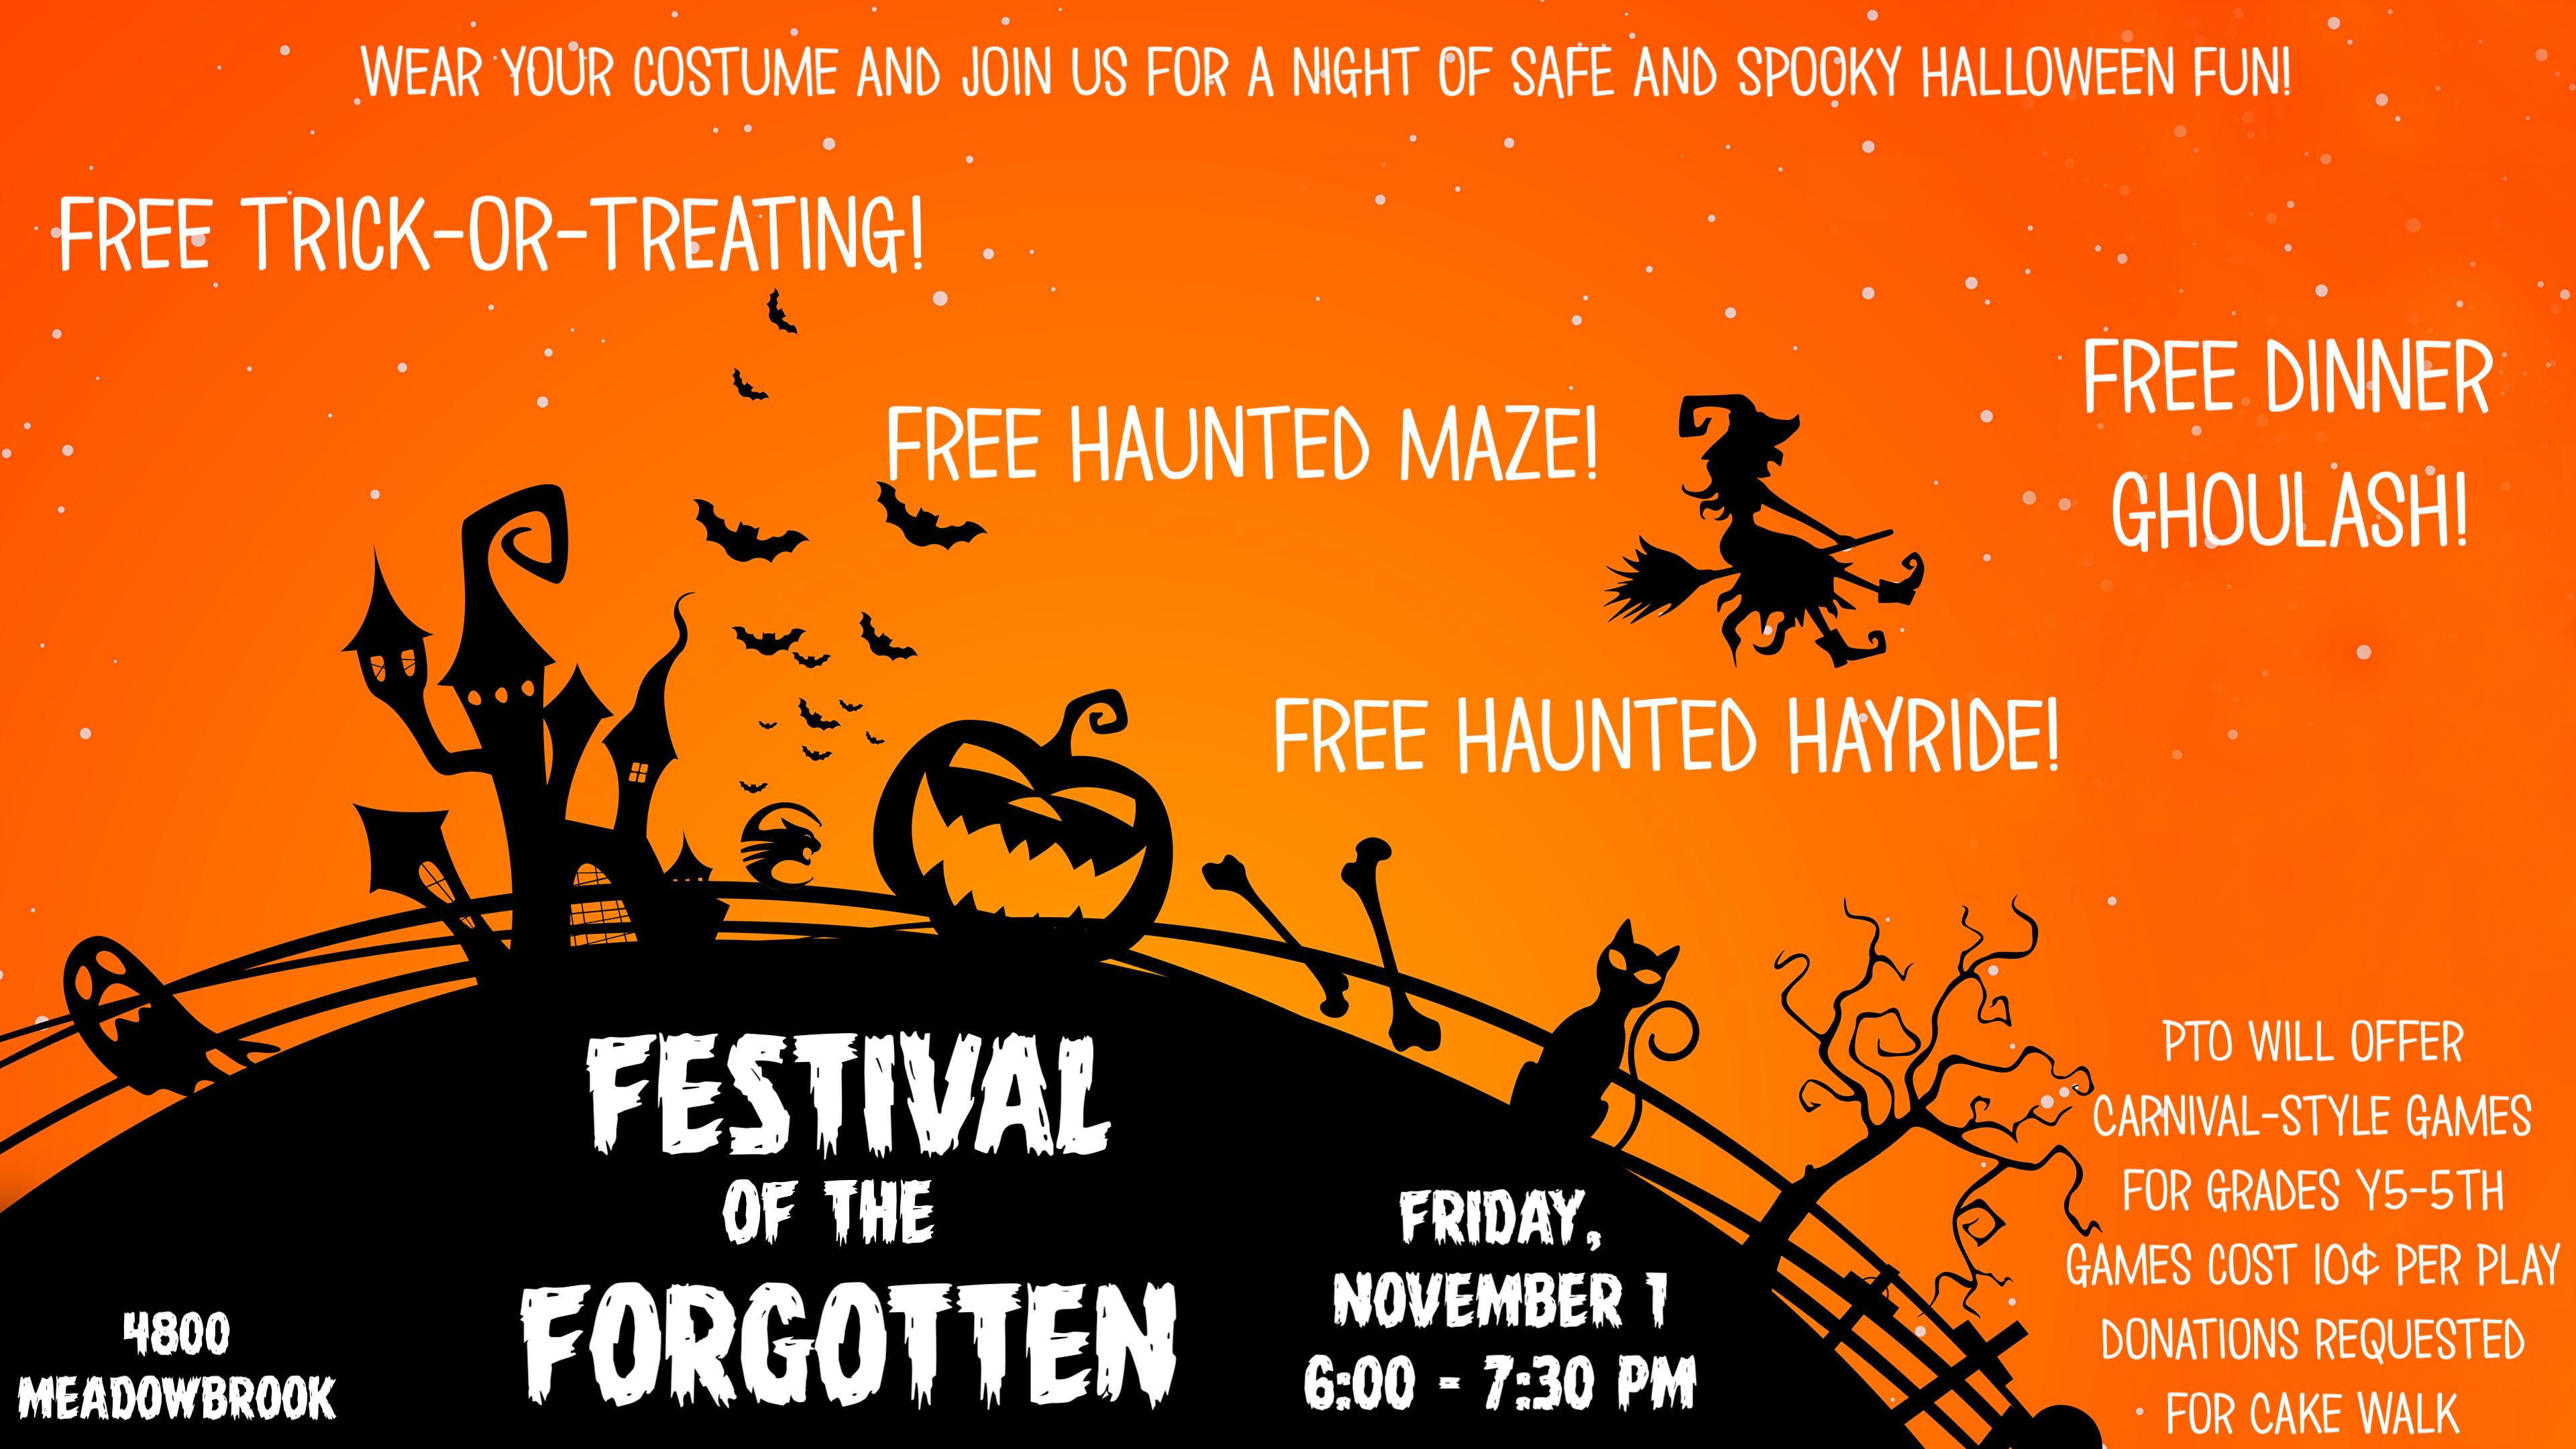 Wear your costume and join us for a night of safe and spooky halloween fun! Free trick-or-treating! Free haunted Maze! Free Haunted Hayride! Free Dinner Ghoulash! Festival of the Forgotten Friday November 1 6:00 - 7:300 PM PTO will offer carnival-style games for grades y5-5th games cost 10¢ per play Donations requested for cake walk 4800 Meadowbrook